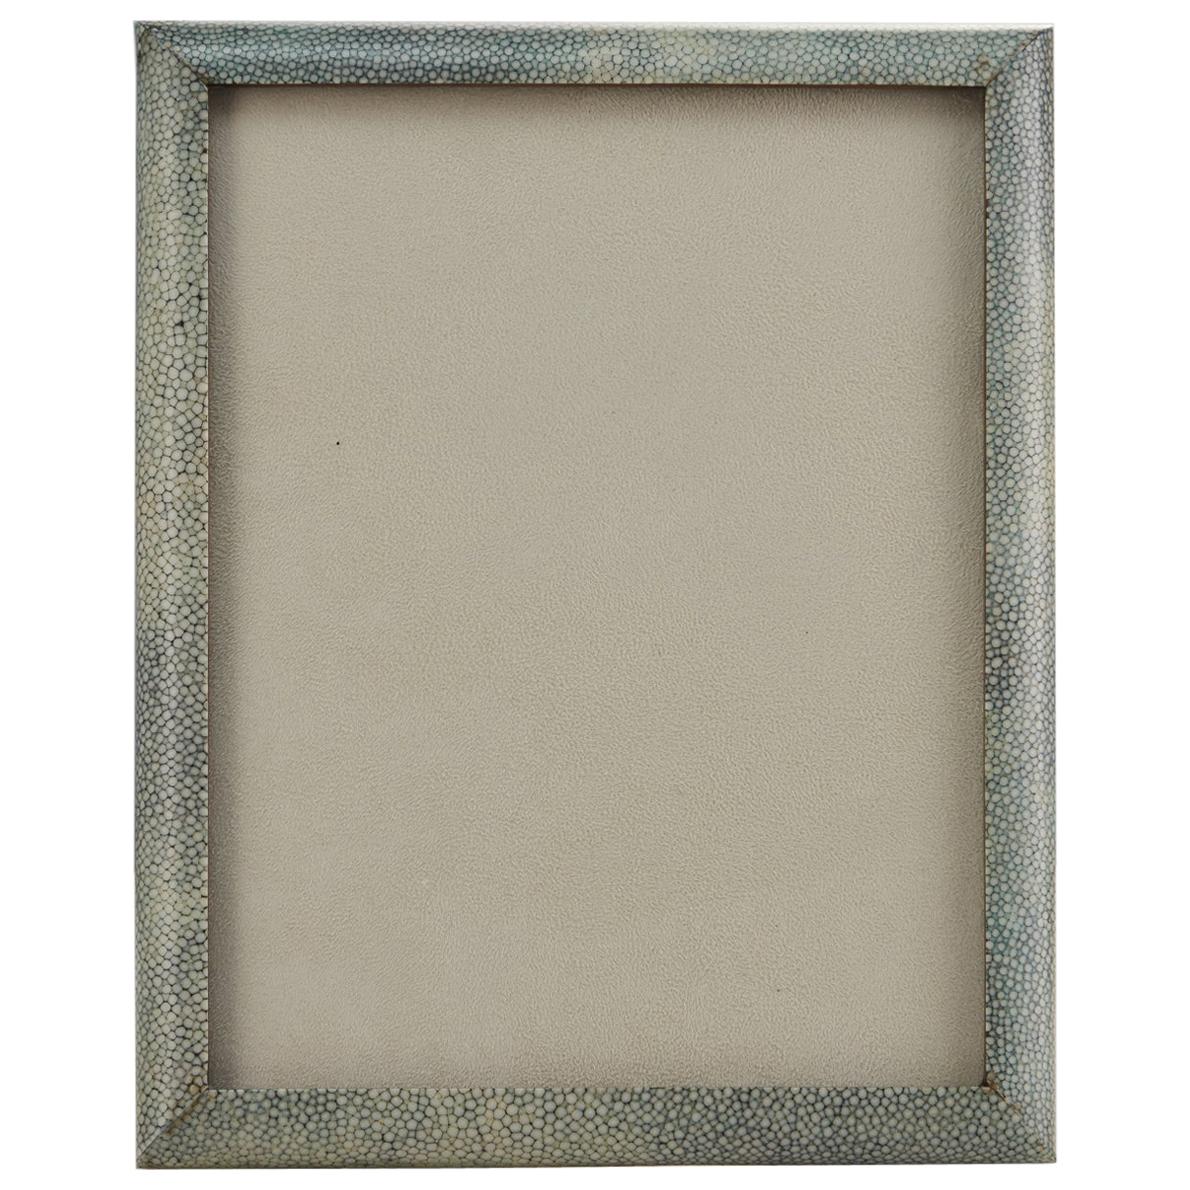 This wonderful 20th Century Art Deco Shagreen photograph frame is in excellent condition with a convex bullnose edge detail, rather than a flat surface.
Photograph frames like this were usually made for quality London stores of the period such as